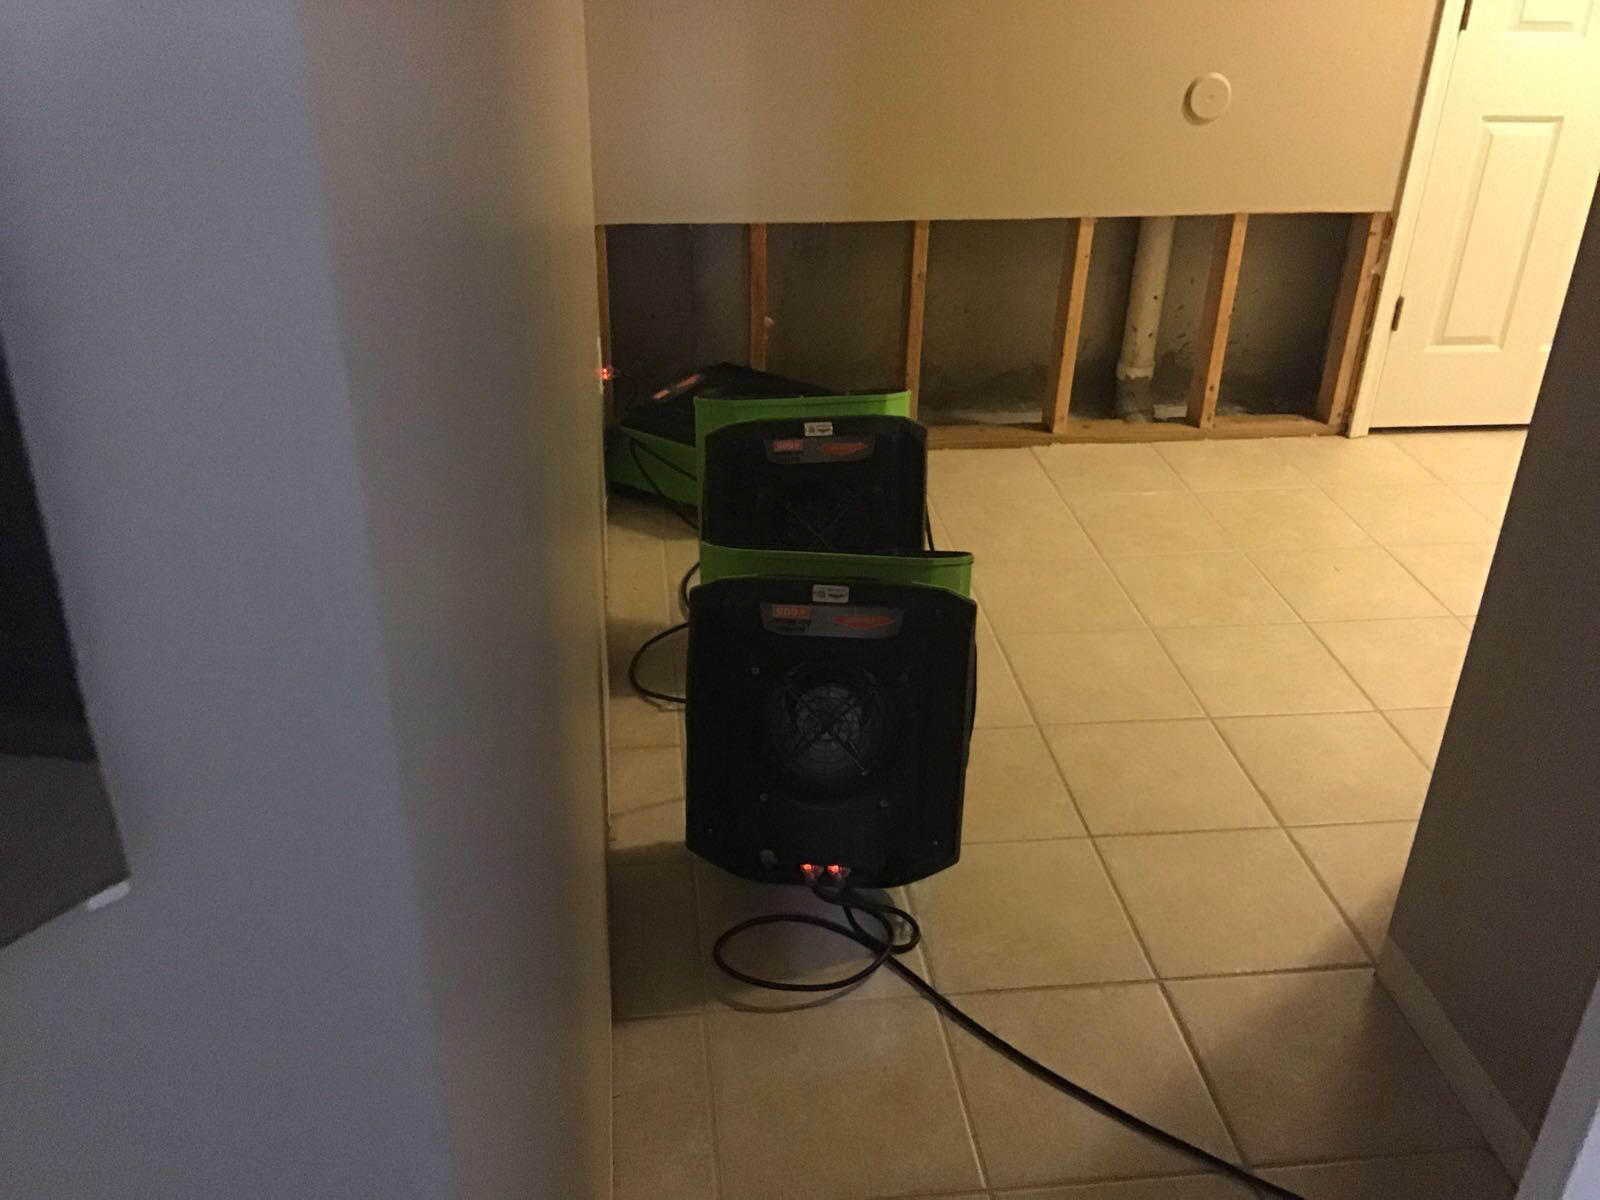 SERVPRO of St. Louis County NW has a team certified to handle water, mold and fire emergencies in Manchester, MO,  we have the right equipment to clean it up. Call us for professional help!